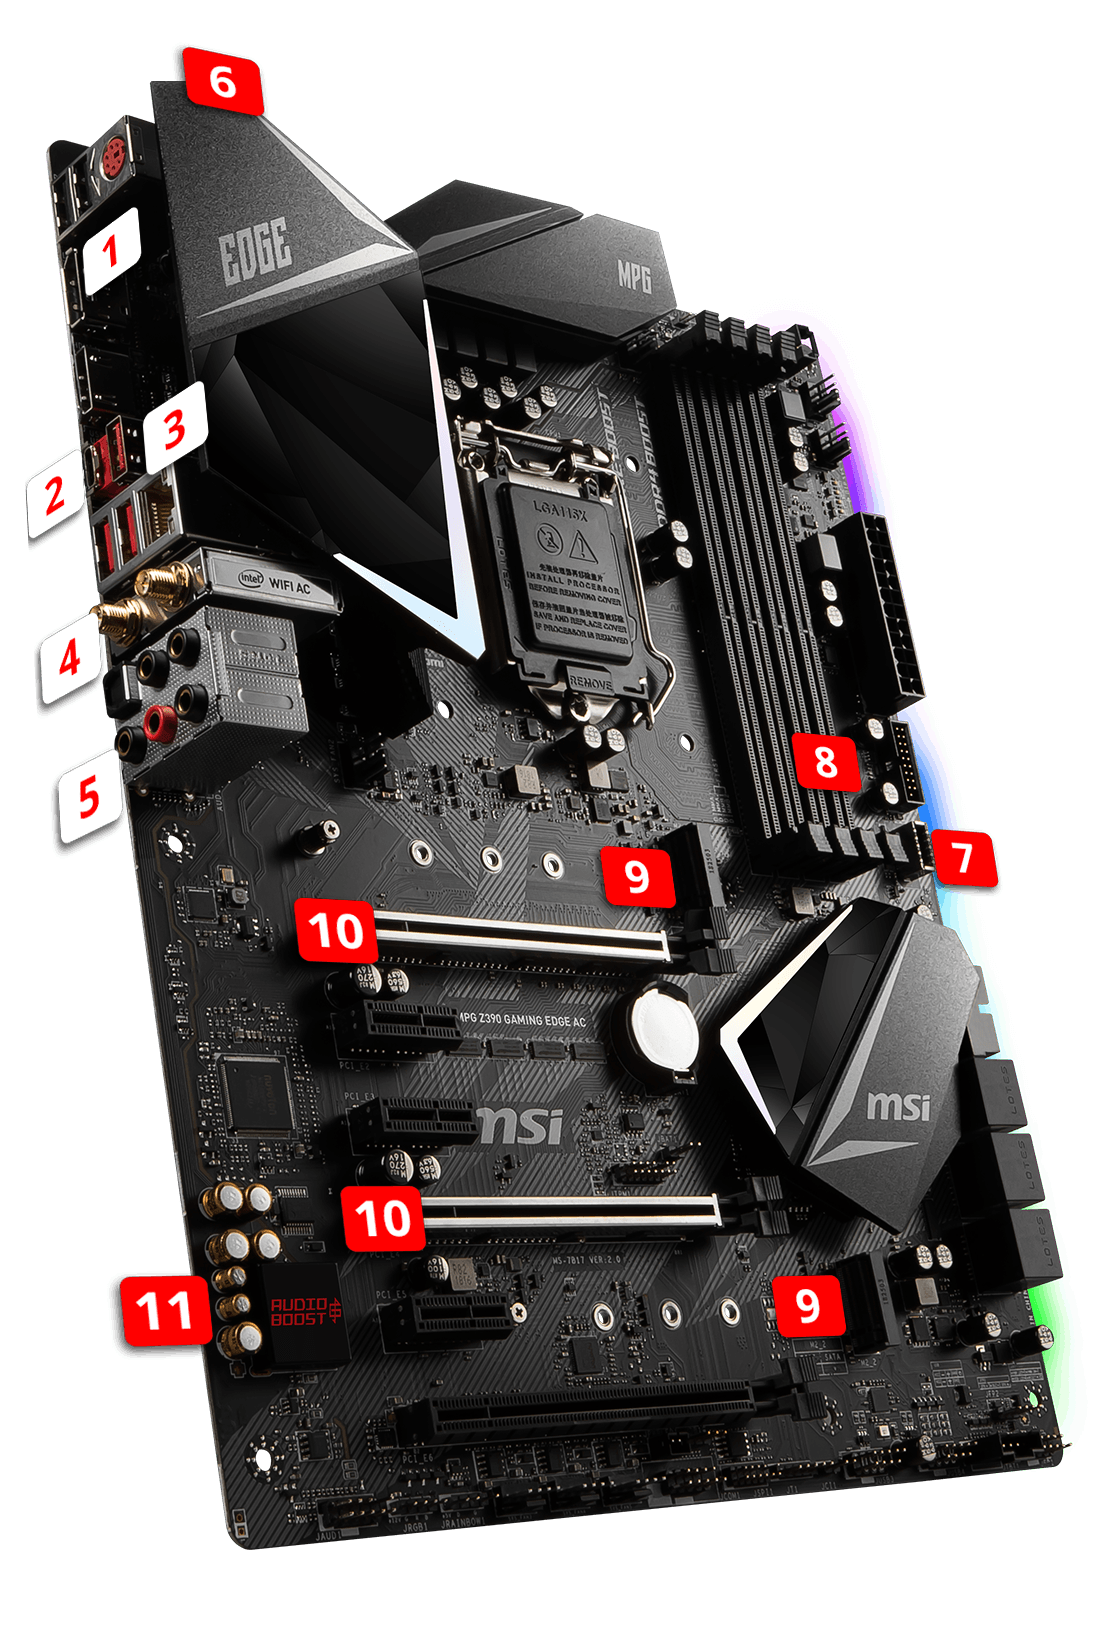 MSI MPG Z390 GAMING EDGE AC overview